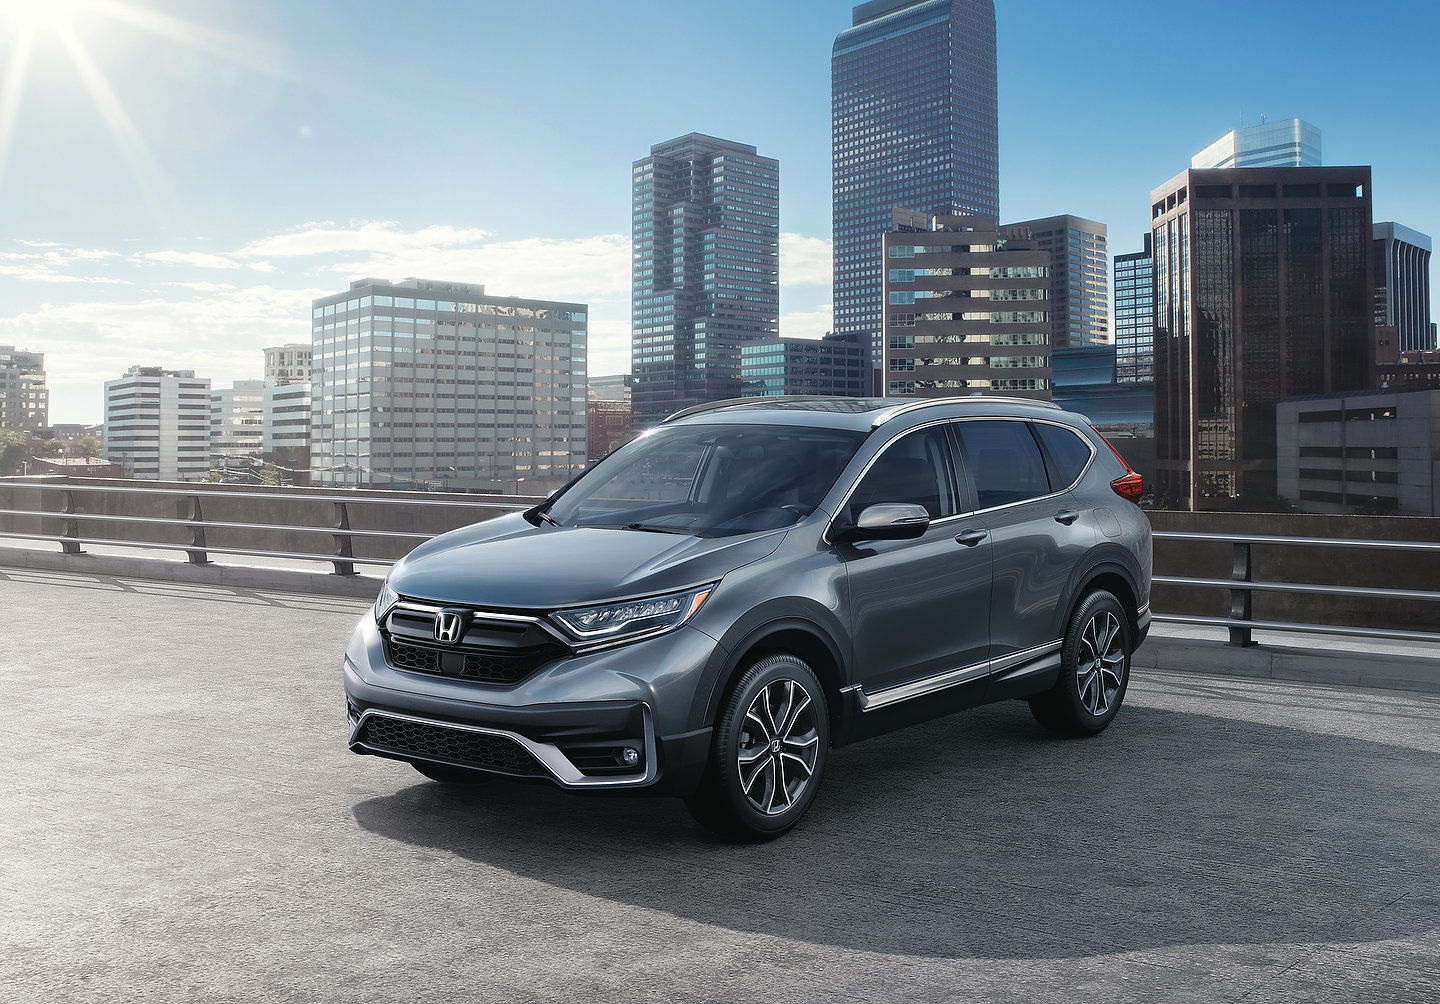 The Honda CR-V Named Green SUV of the Year by Green Car Journal